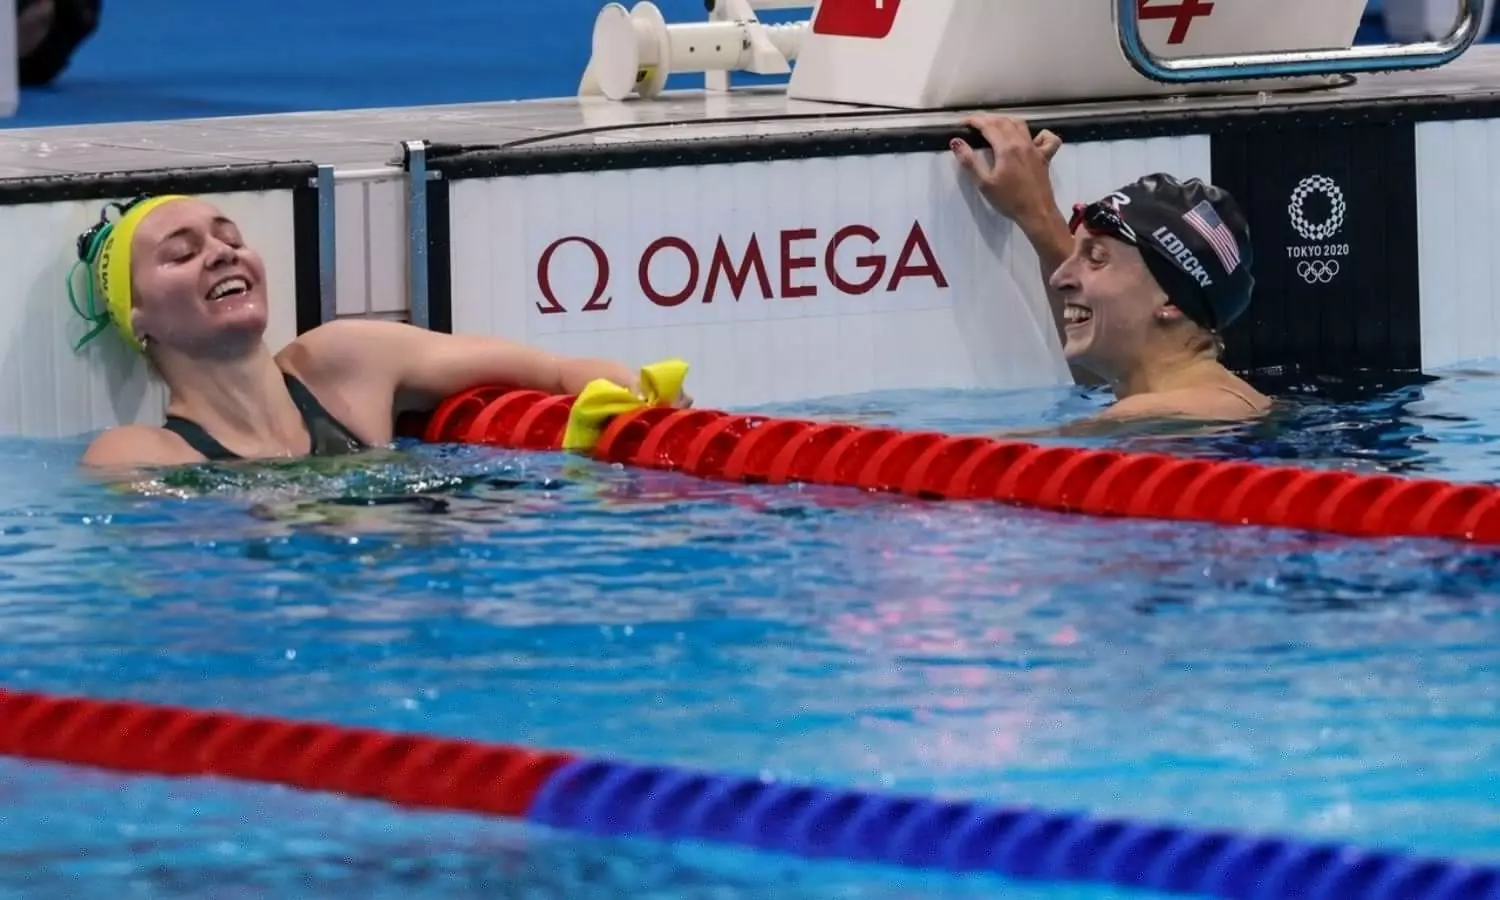 Tokyo Olympics Swimming Day 5, July 28 – Another battle between Katie Ledecky and Ariarne Titmus on the cards, Kristof Milak looking to break his World Record